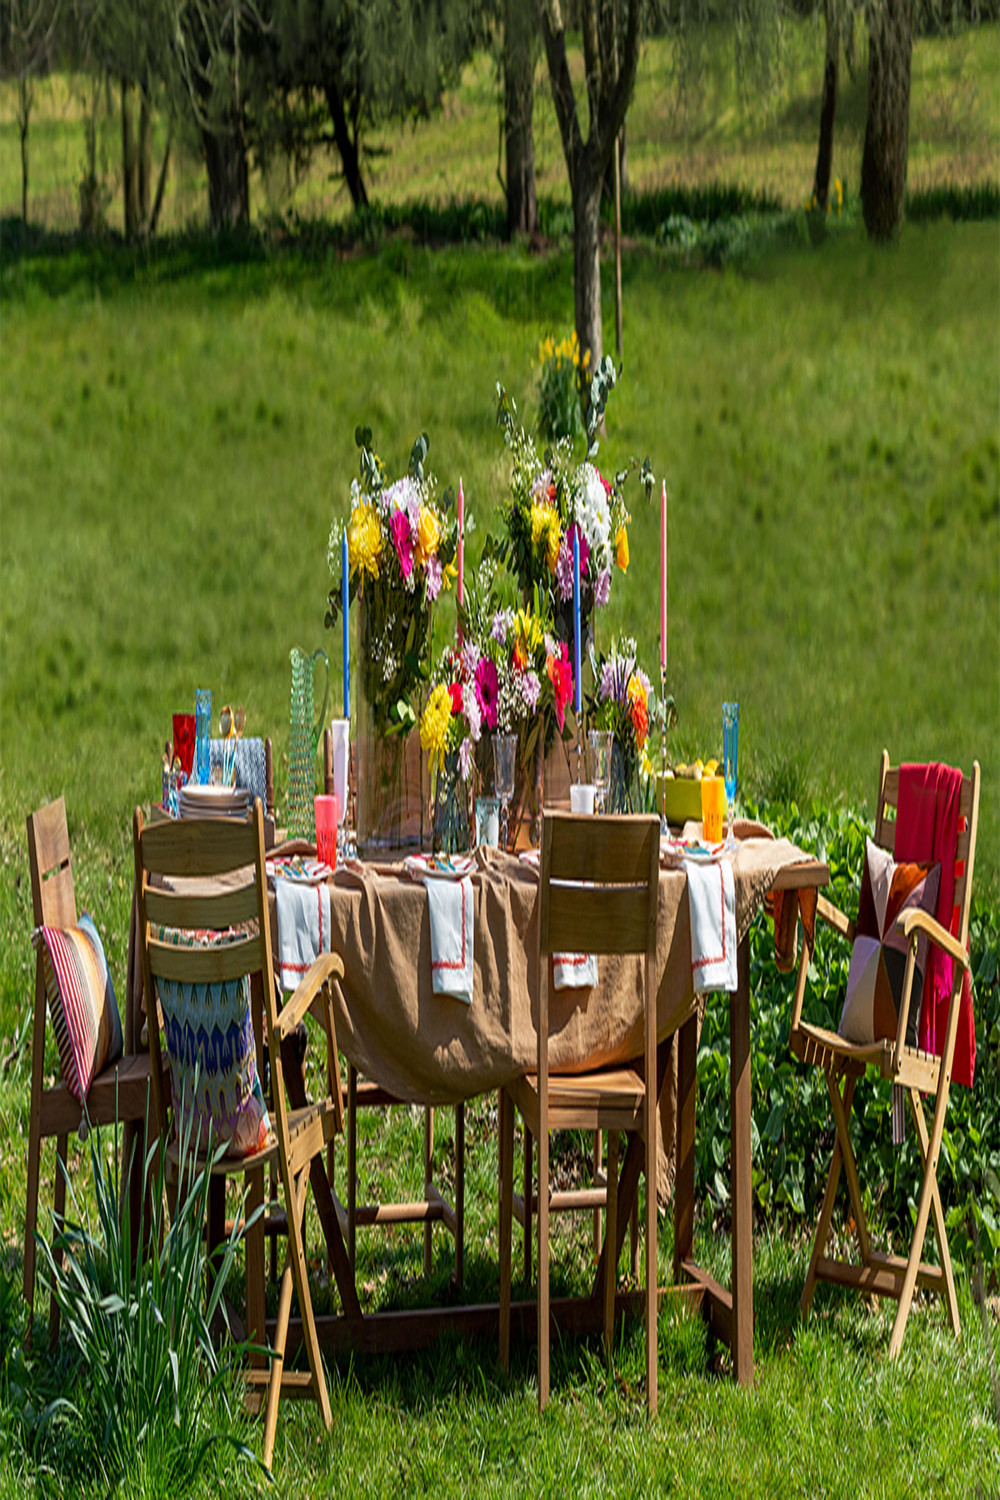 Outdoor birthday party ideas:  options for fun festivities